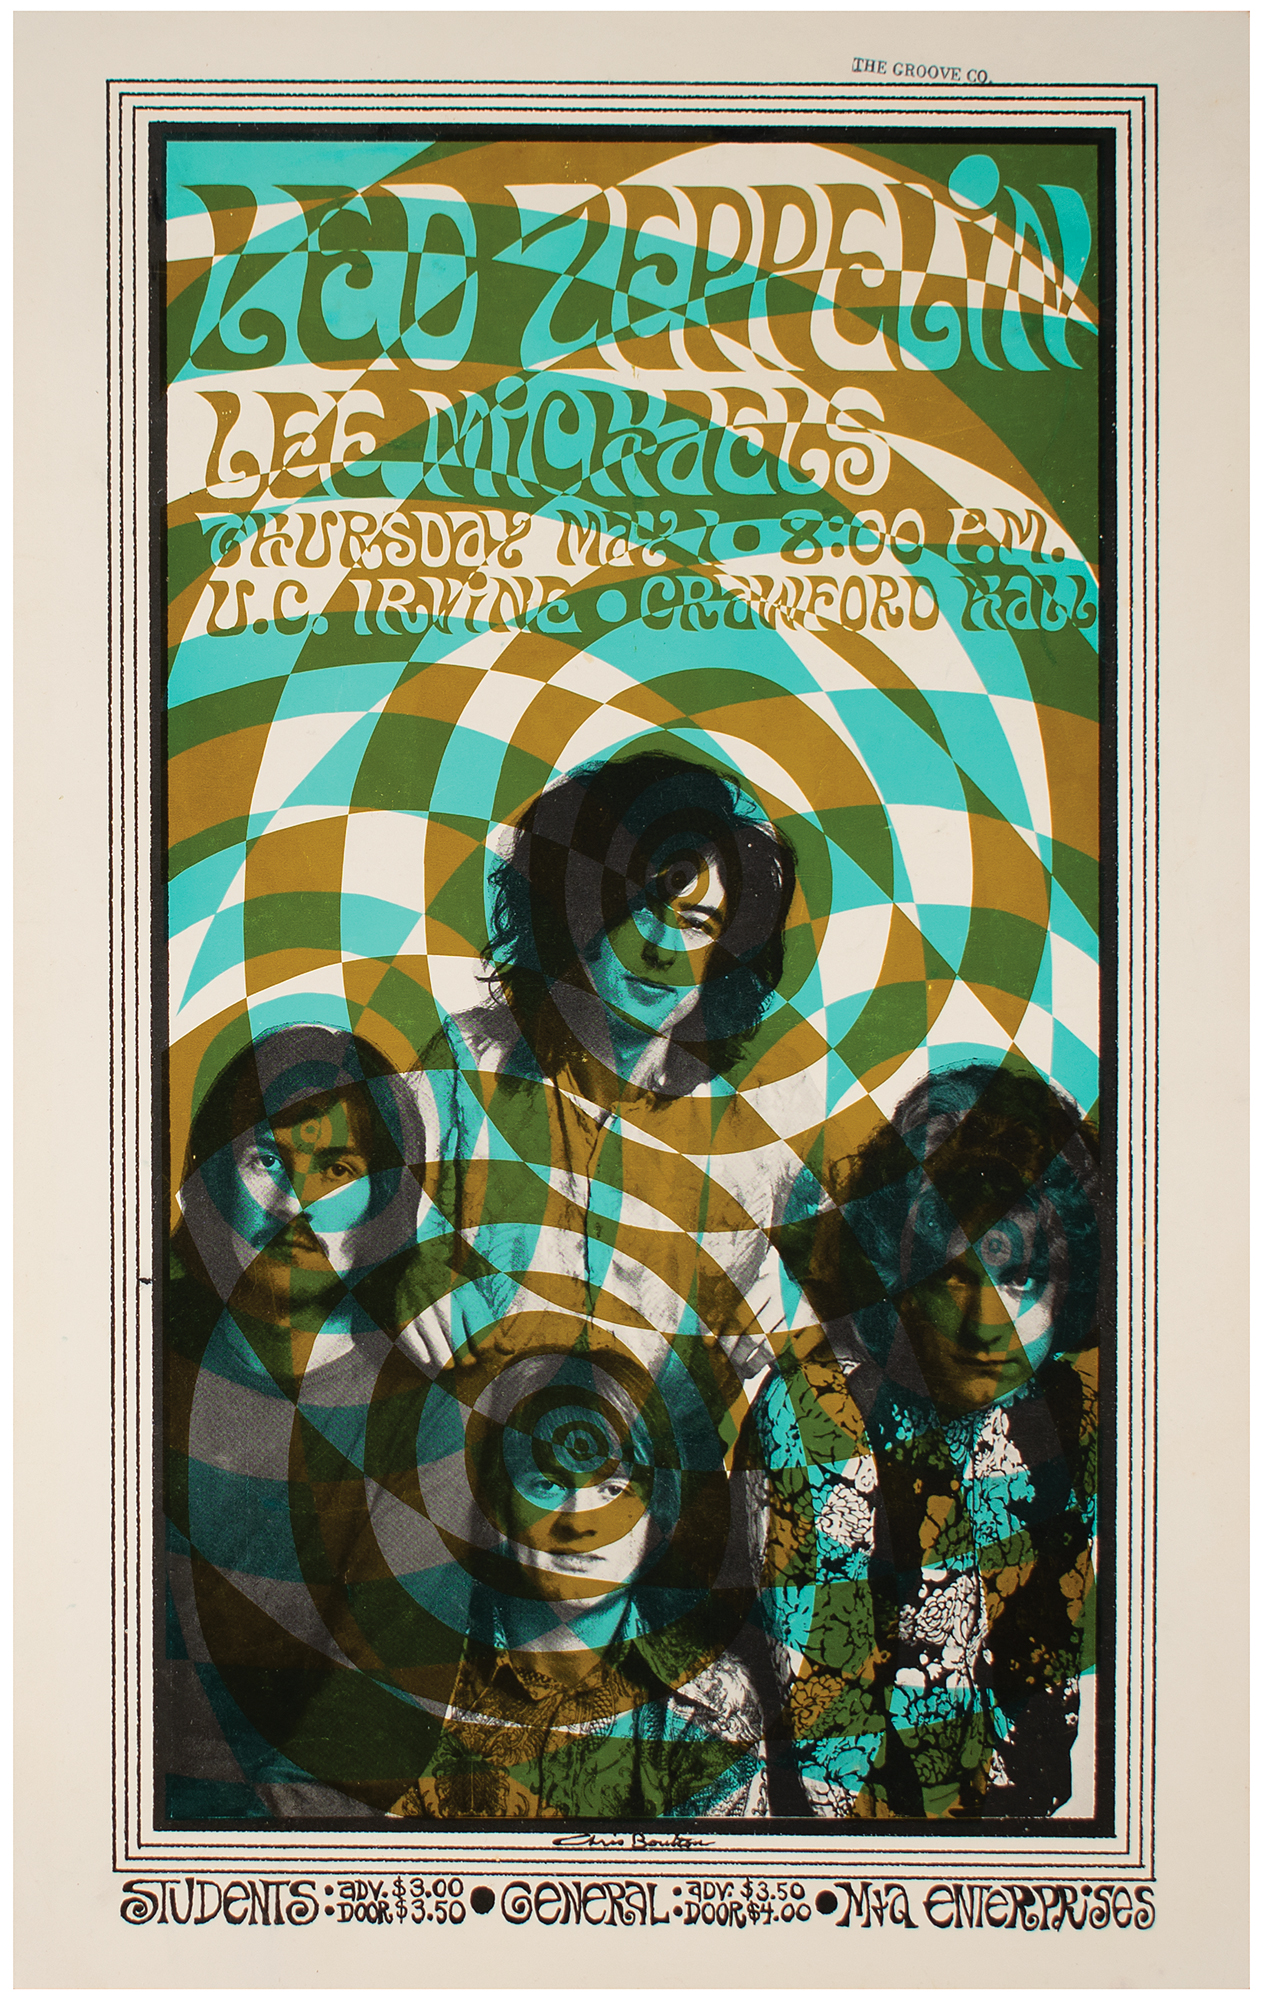 Lot #2139 Led Zeppelin 1969 Crawford Hall Poster